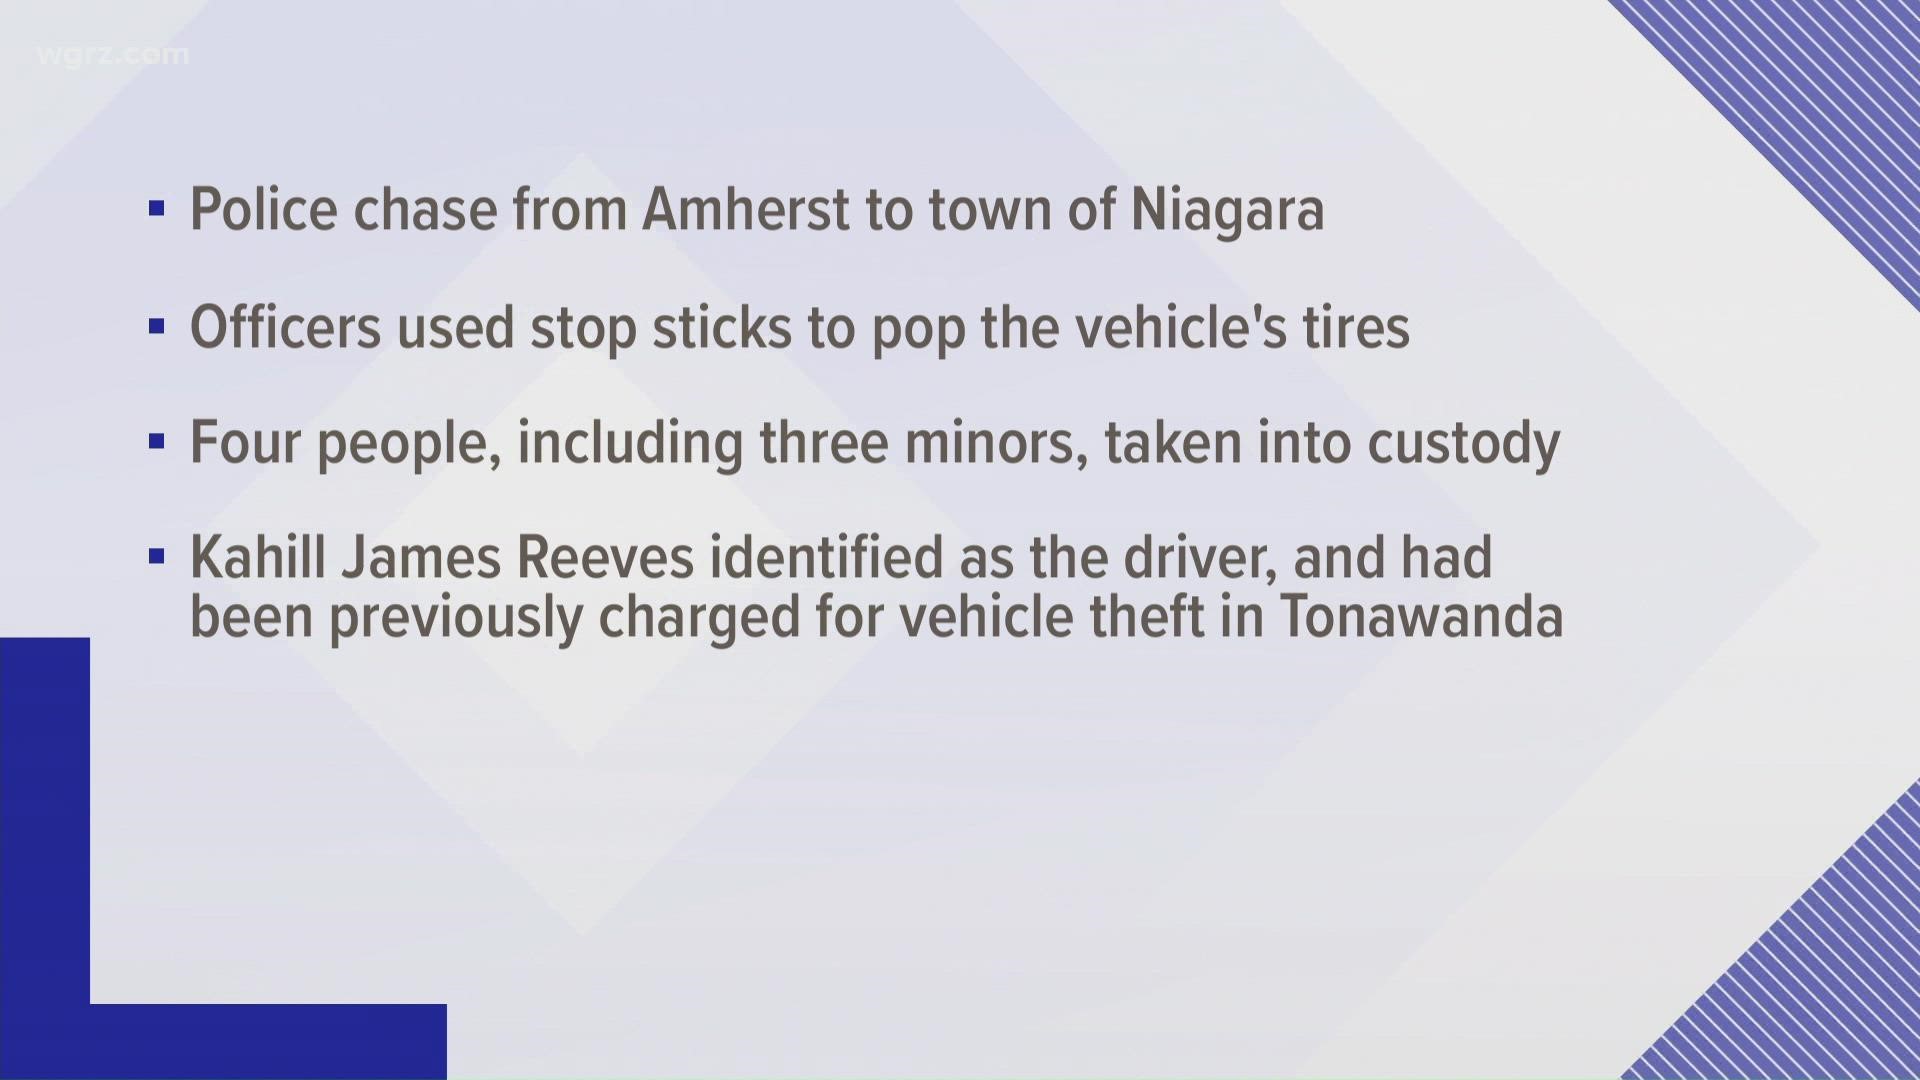 Police say the group was allegedly stealing from vehicles and were also driving a stolen car.